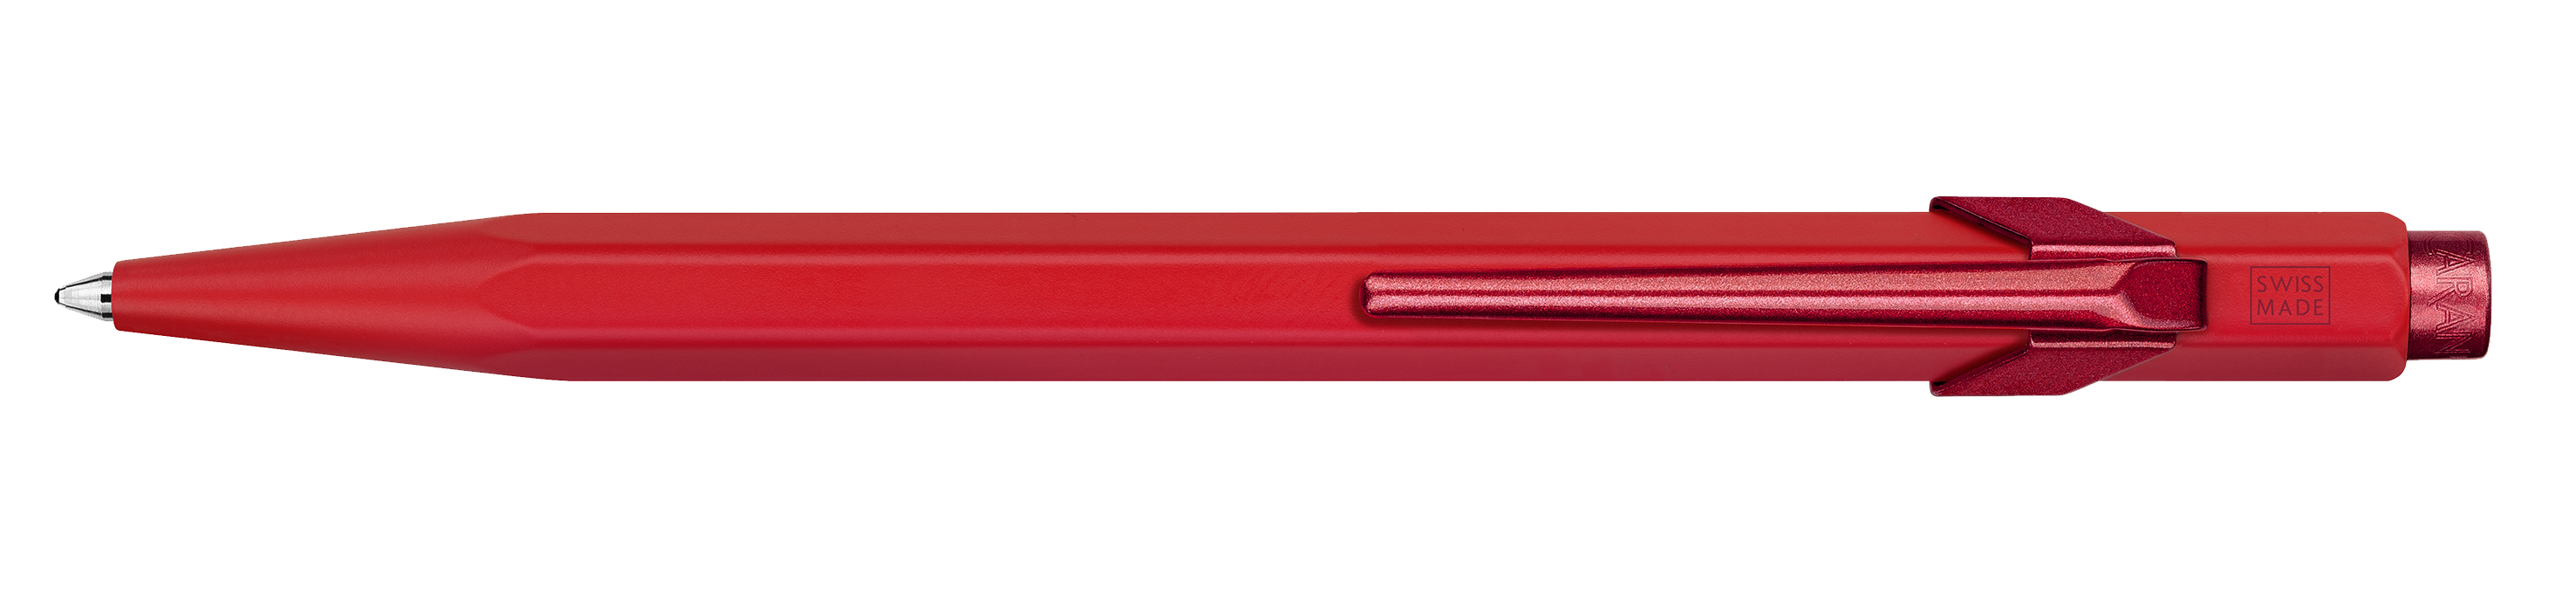 Caran d'Ache 849 Claim Your Style III Limited Edition Scarlet Red Ballpoint